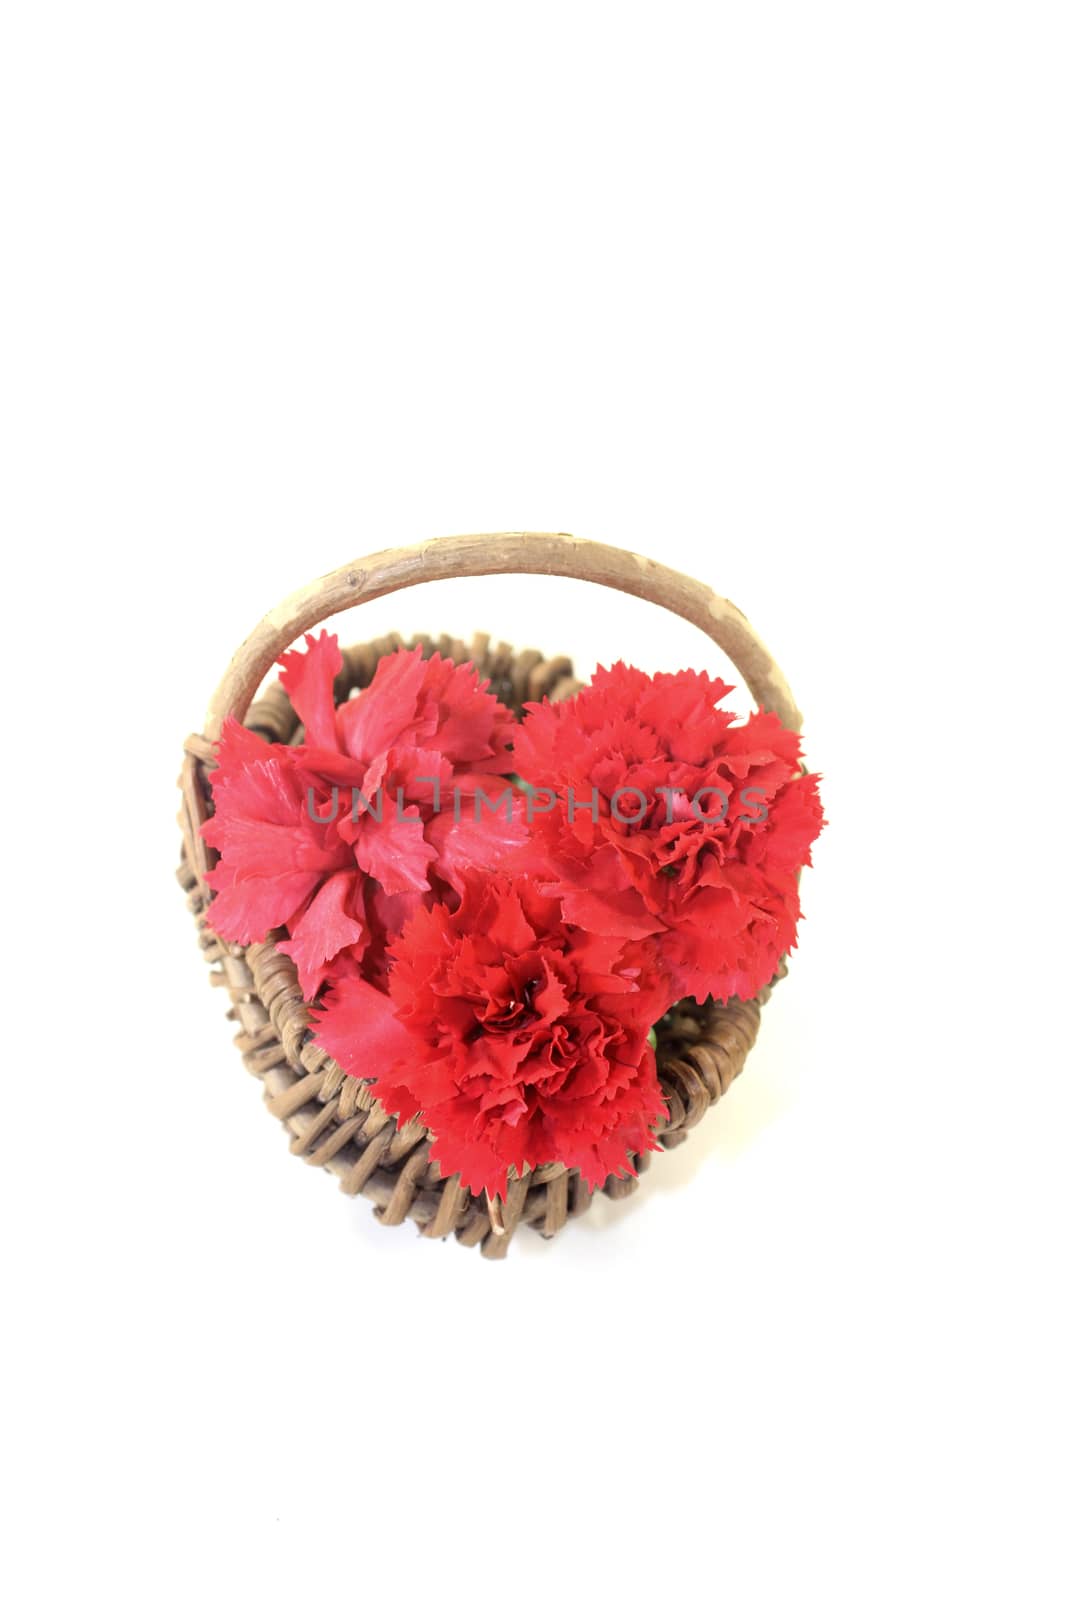 red carnations blossoms in a basket on light background